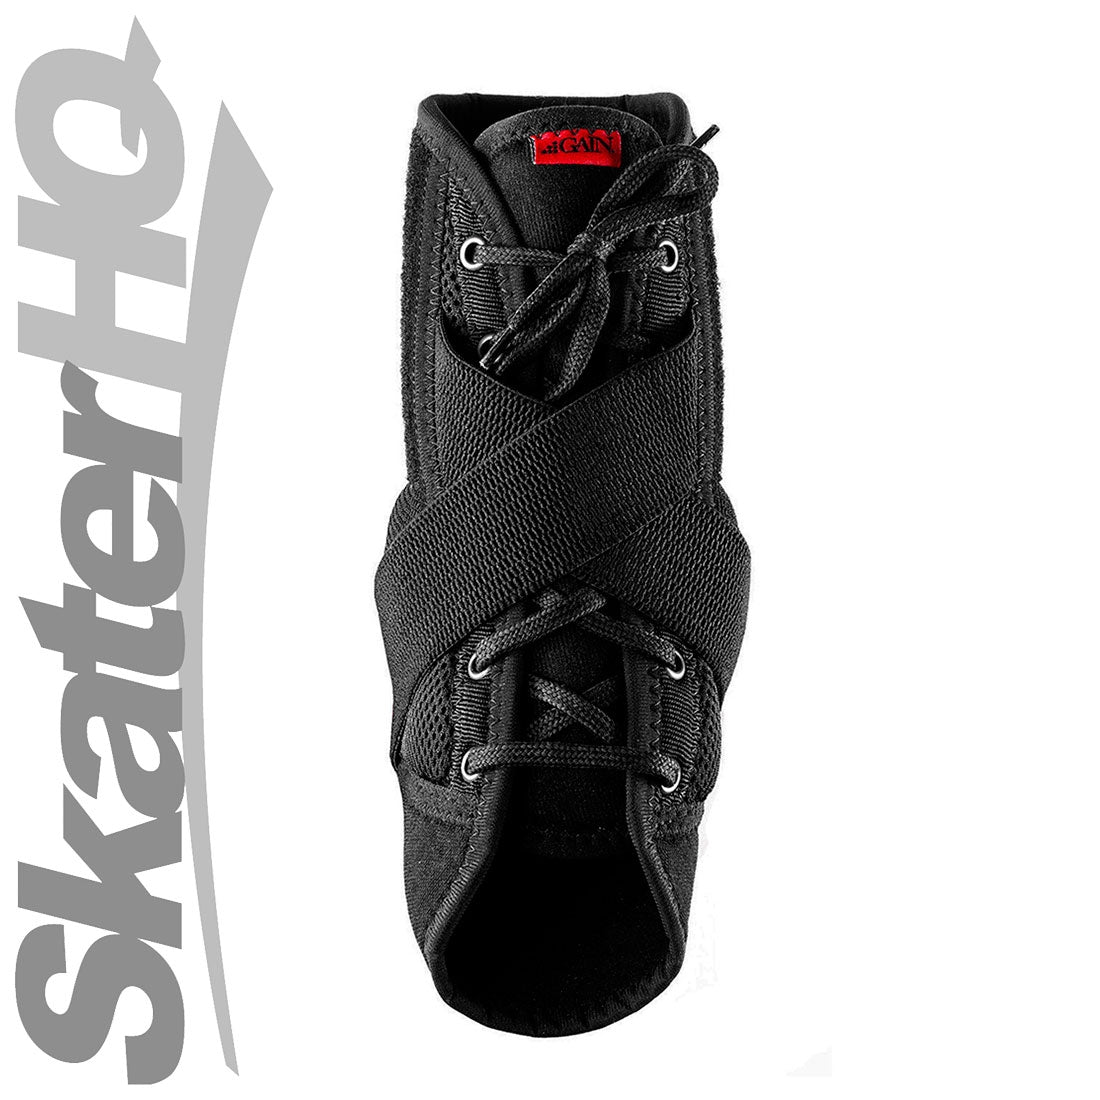 GAIN Pro Ankle Protectors - Black Protective Gear